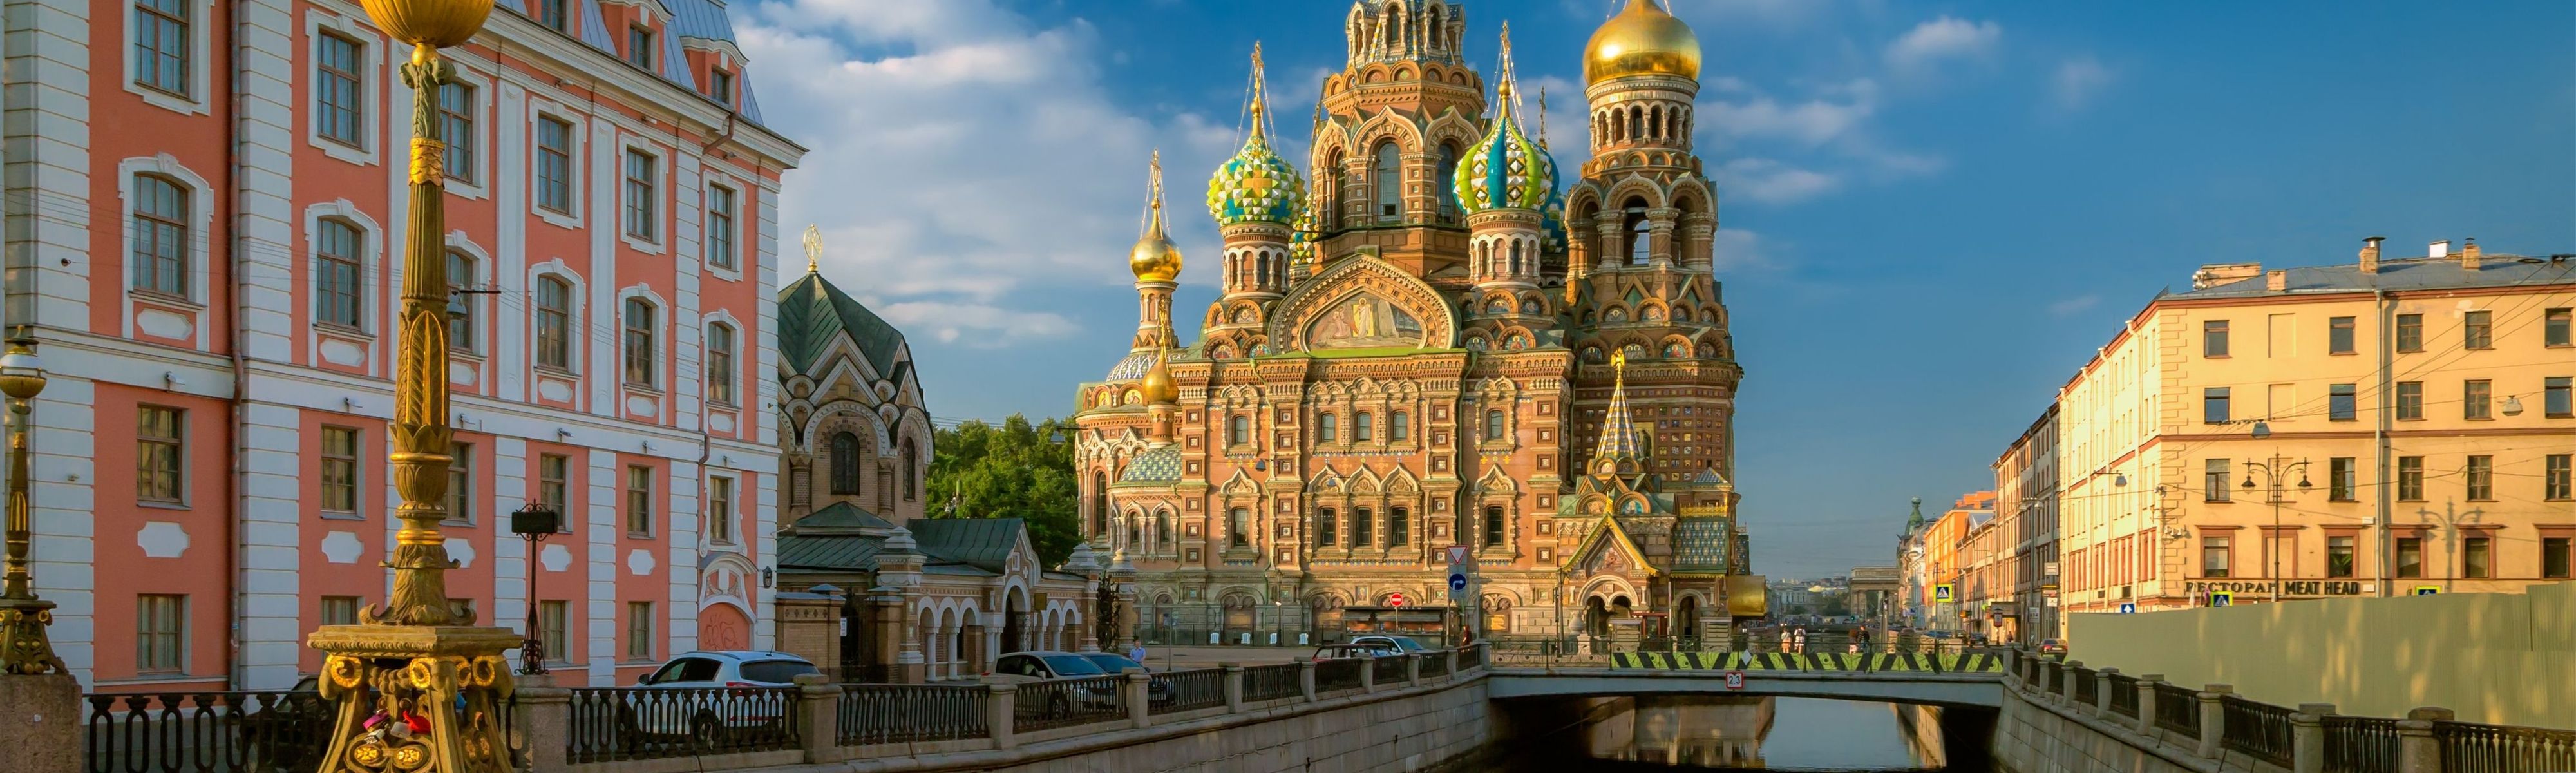 church of the savior by a river in russia